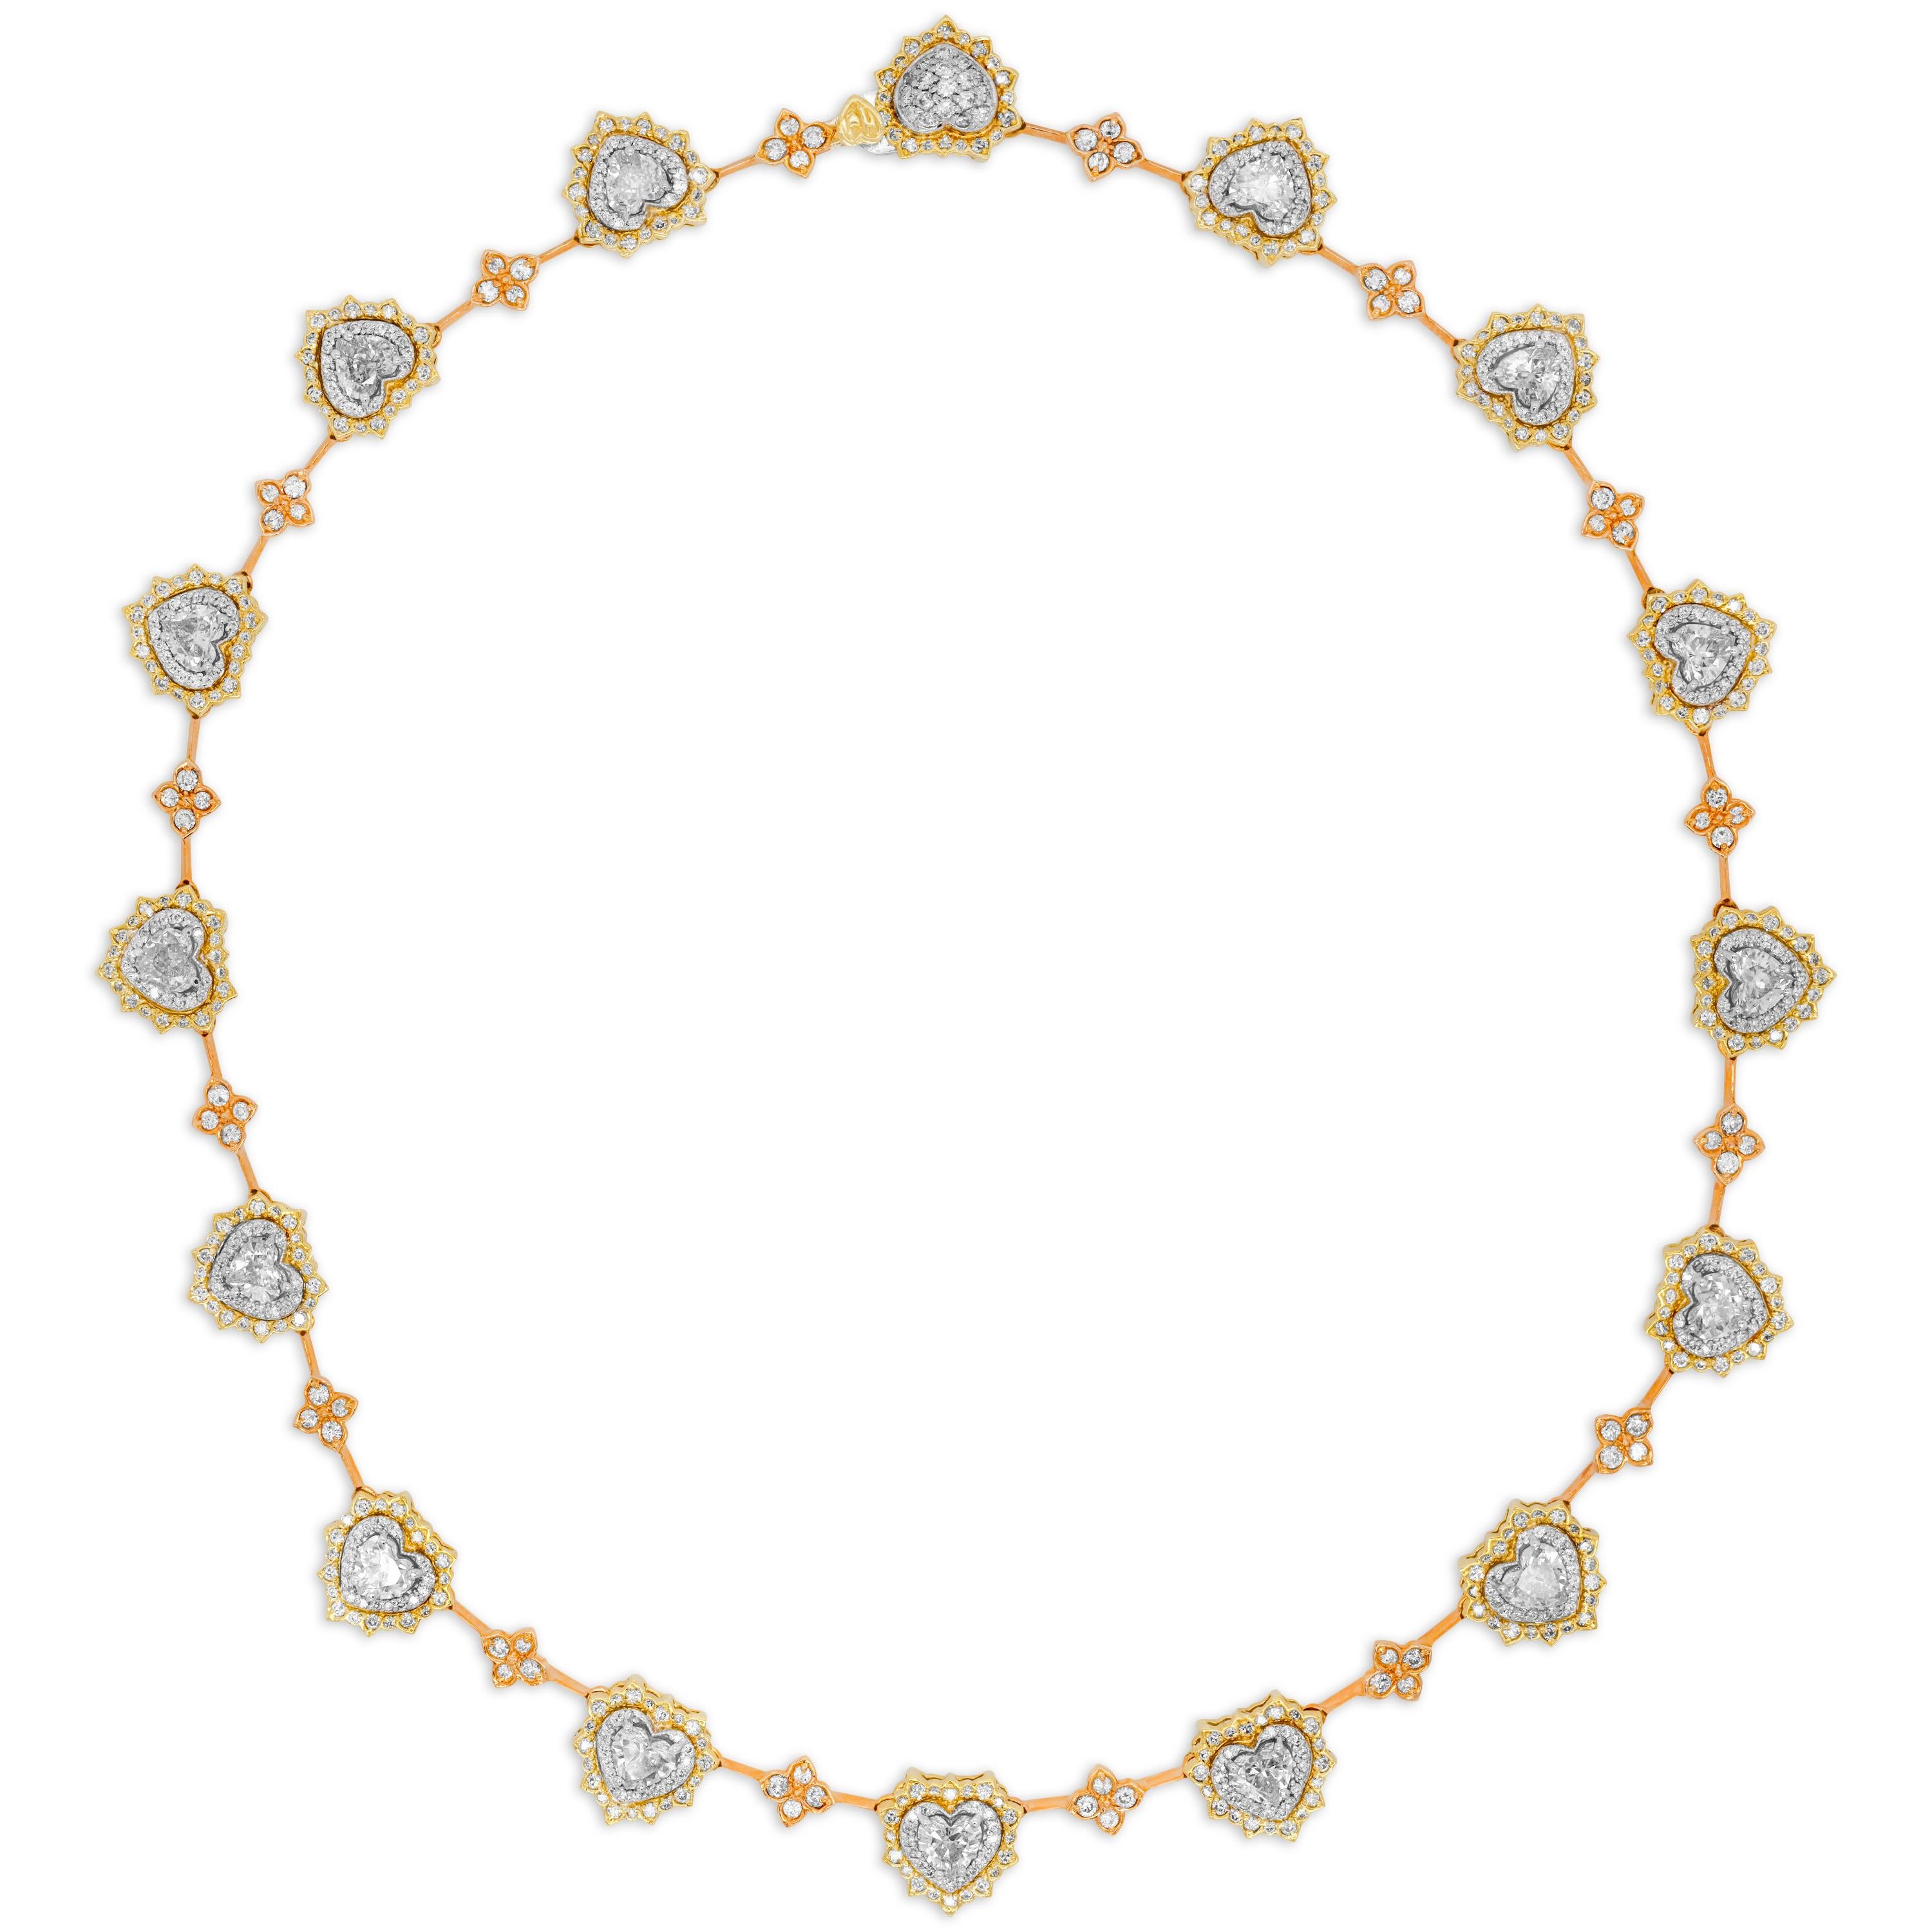 Stambolian 18K Yellow Rose White Gold and Heart Shape Diamonds Choker Necklace

This one-of-a-kind necklace features 15 heart-shape diamonds with two rows of diamonds surrounding each diamond. The connections in between the hearts are done in rose